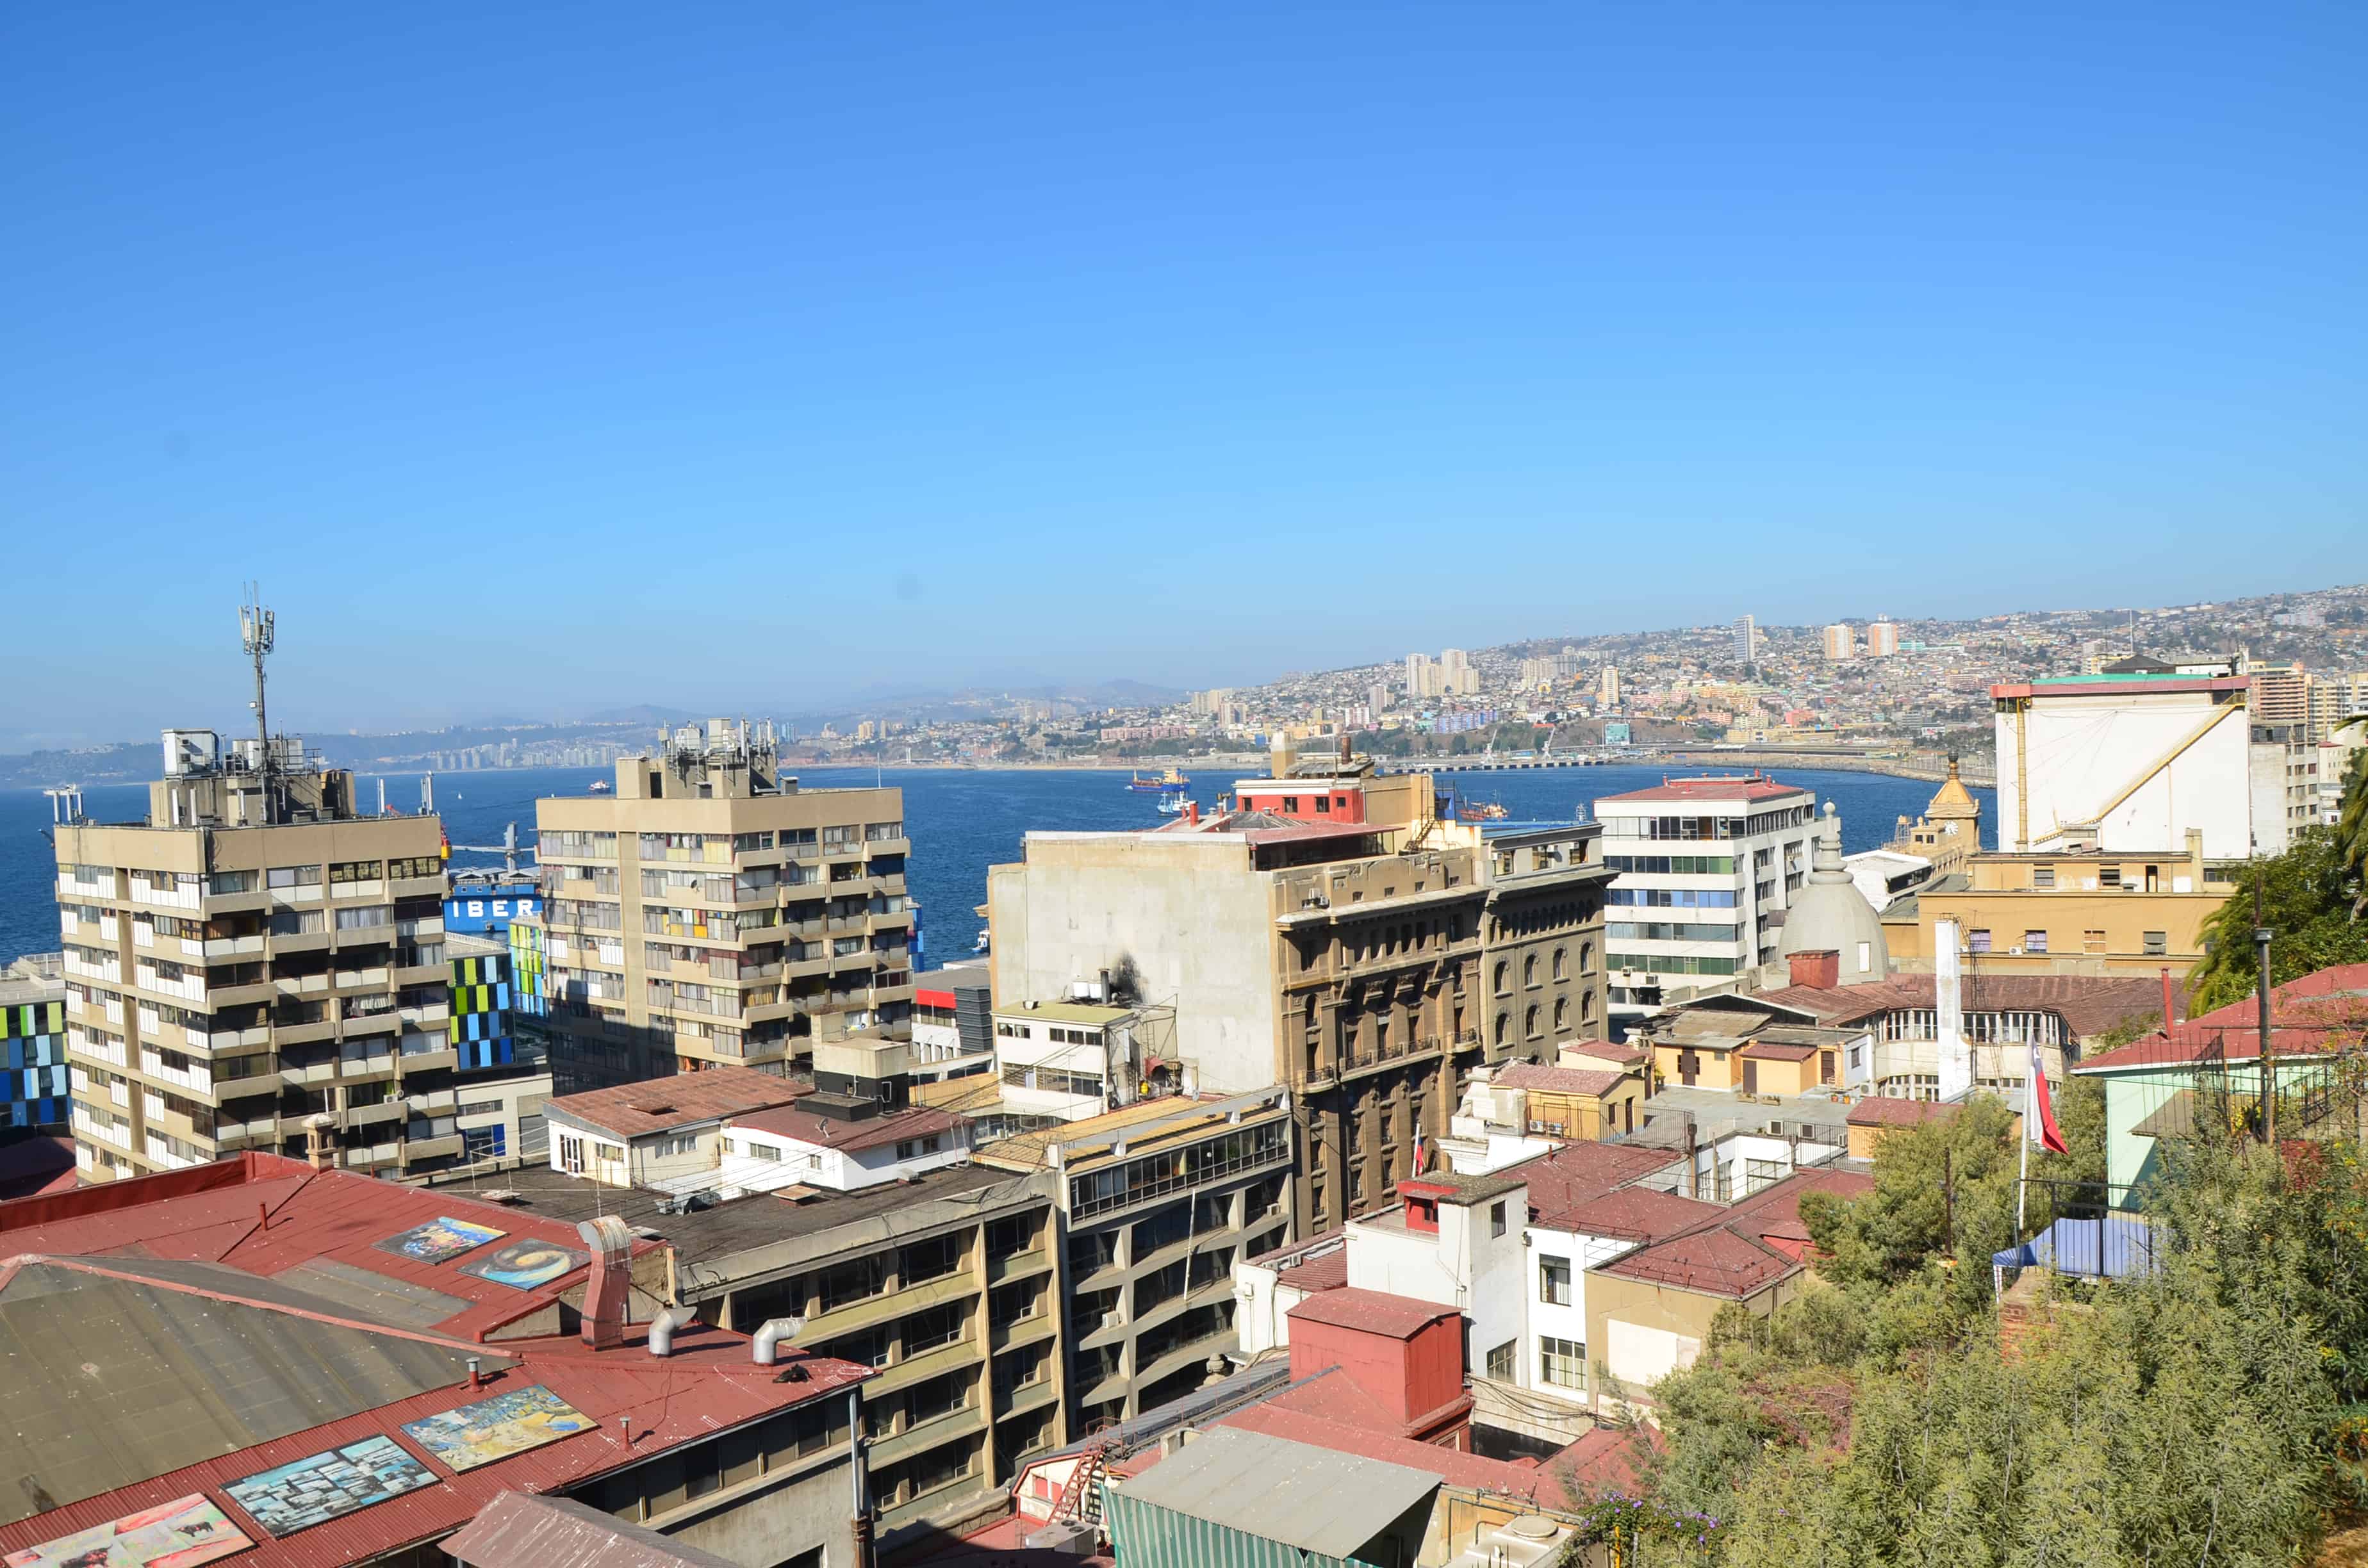 The view from Paseo Yugoslavo in Valparaíso, Chile